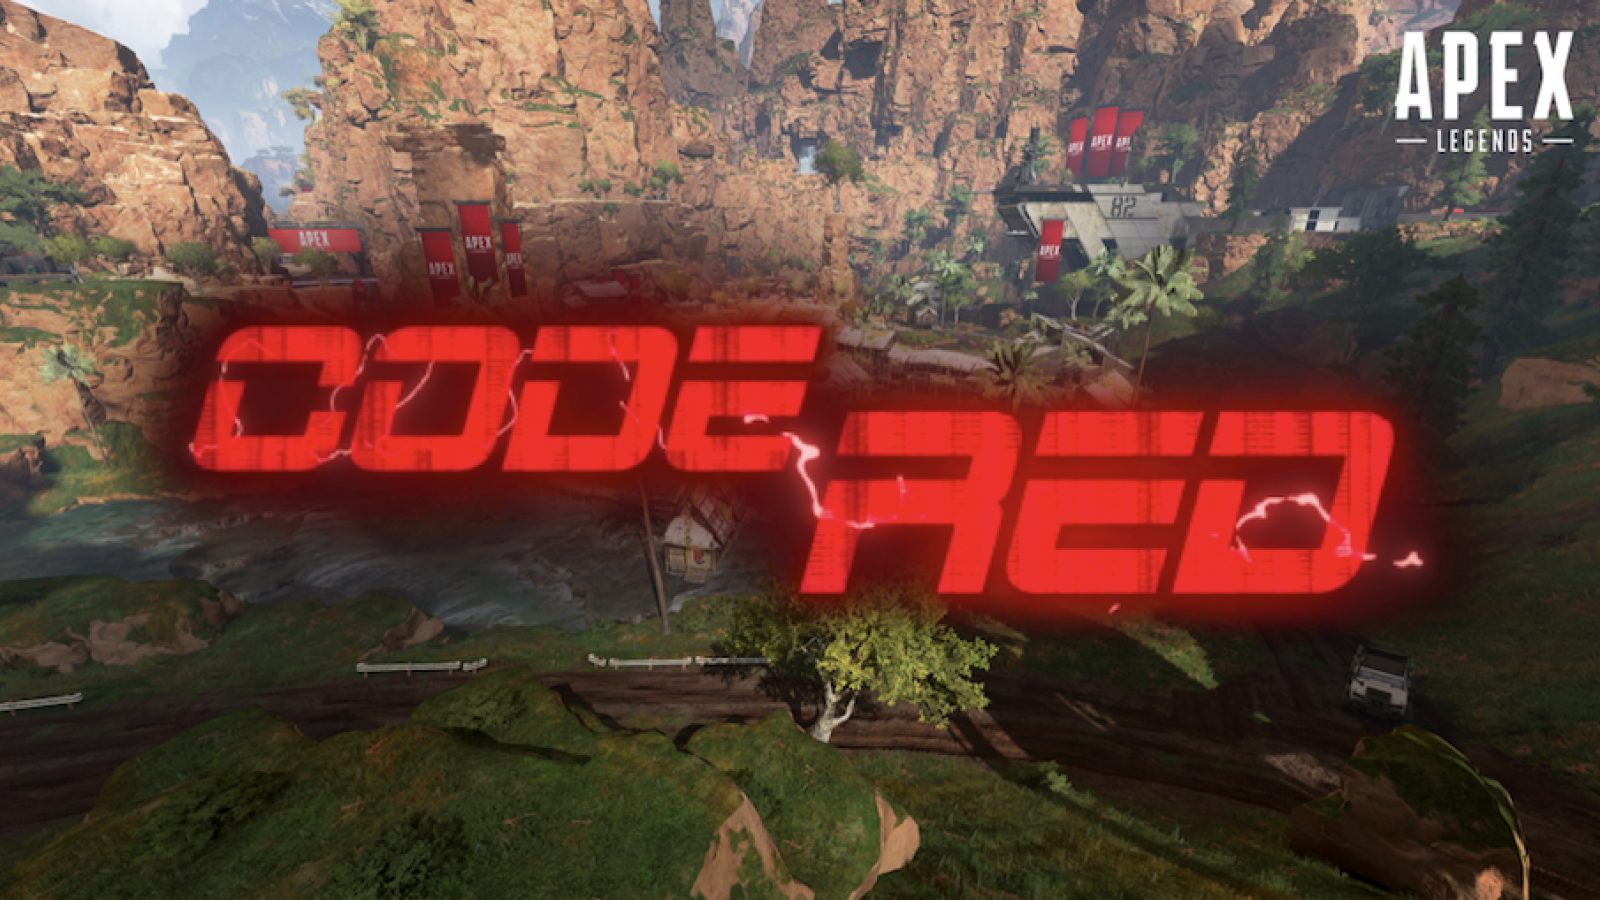 Port skovl grænse How to watch Dr Disrespect's Code Red Apex Legends tournament ft Ninja,  summit1g, and more – Streams, Brackets, Format - Dexerto